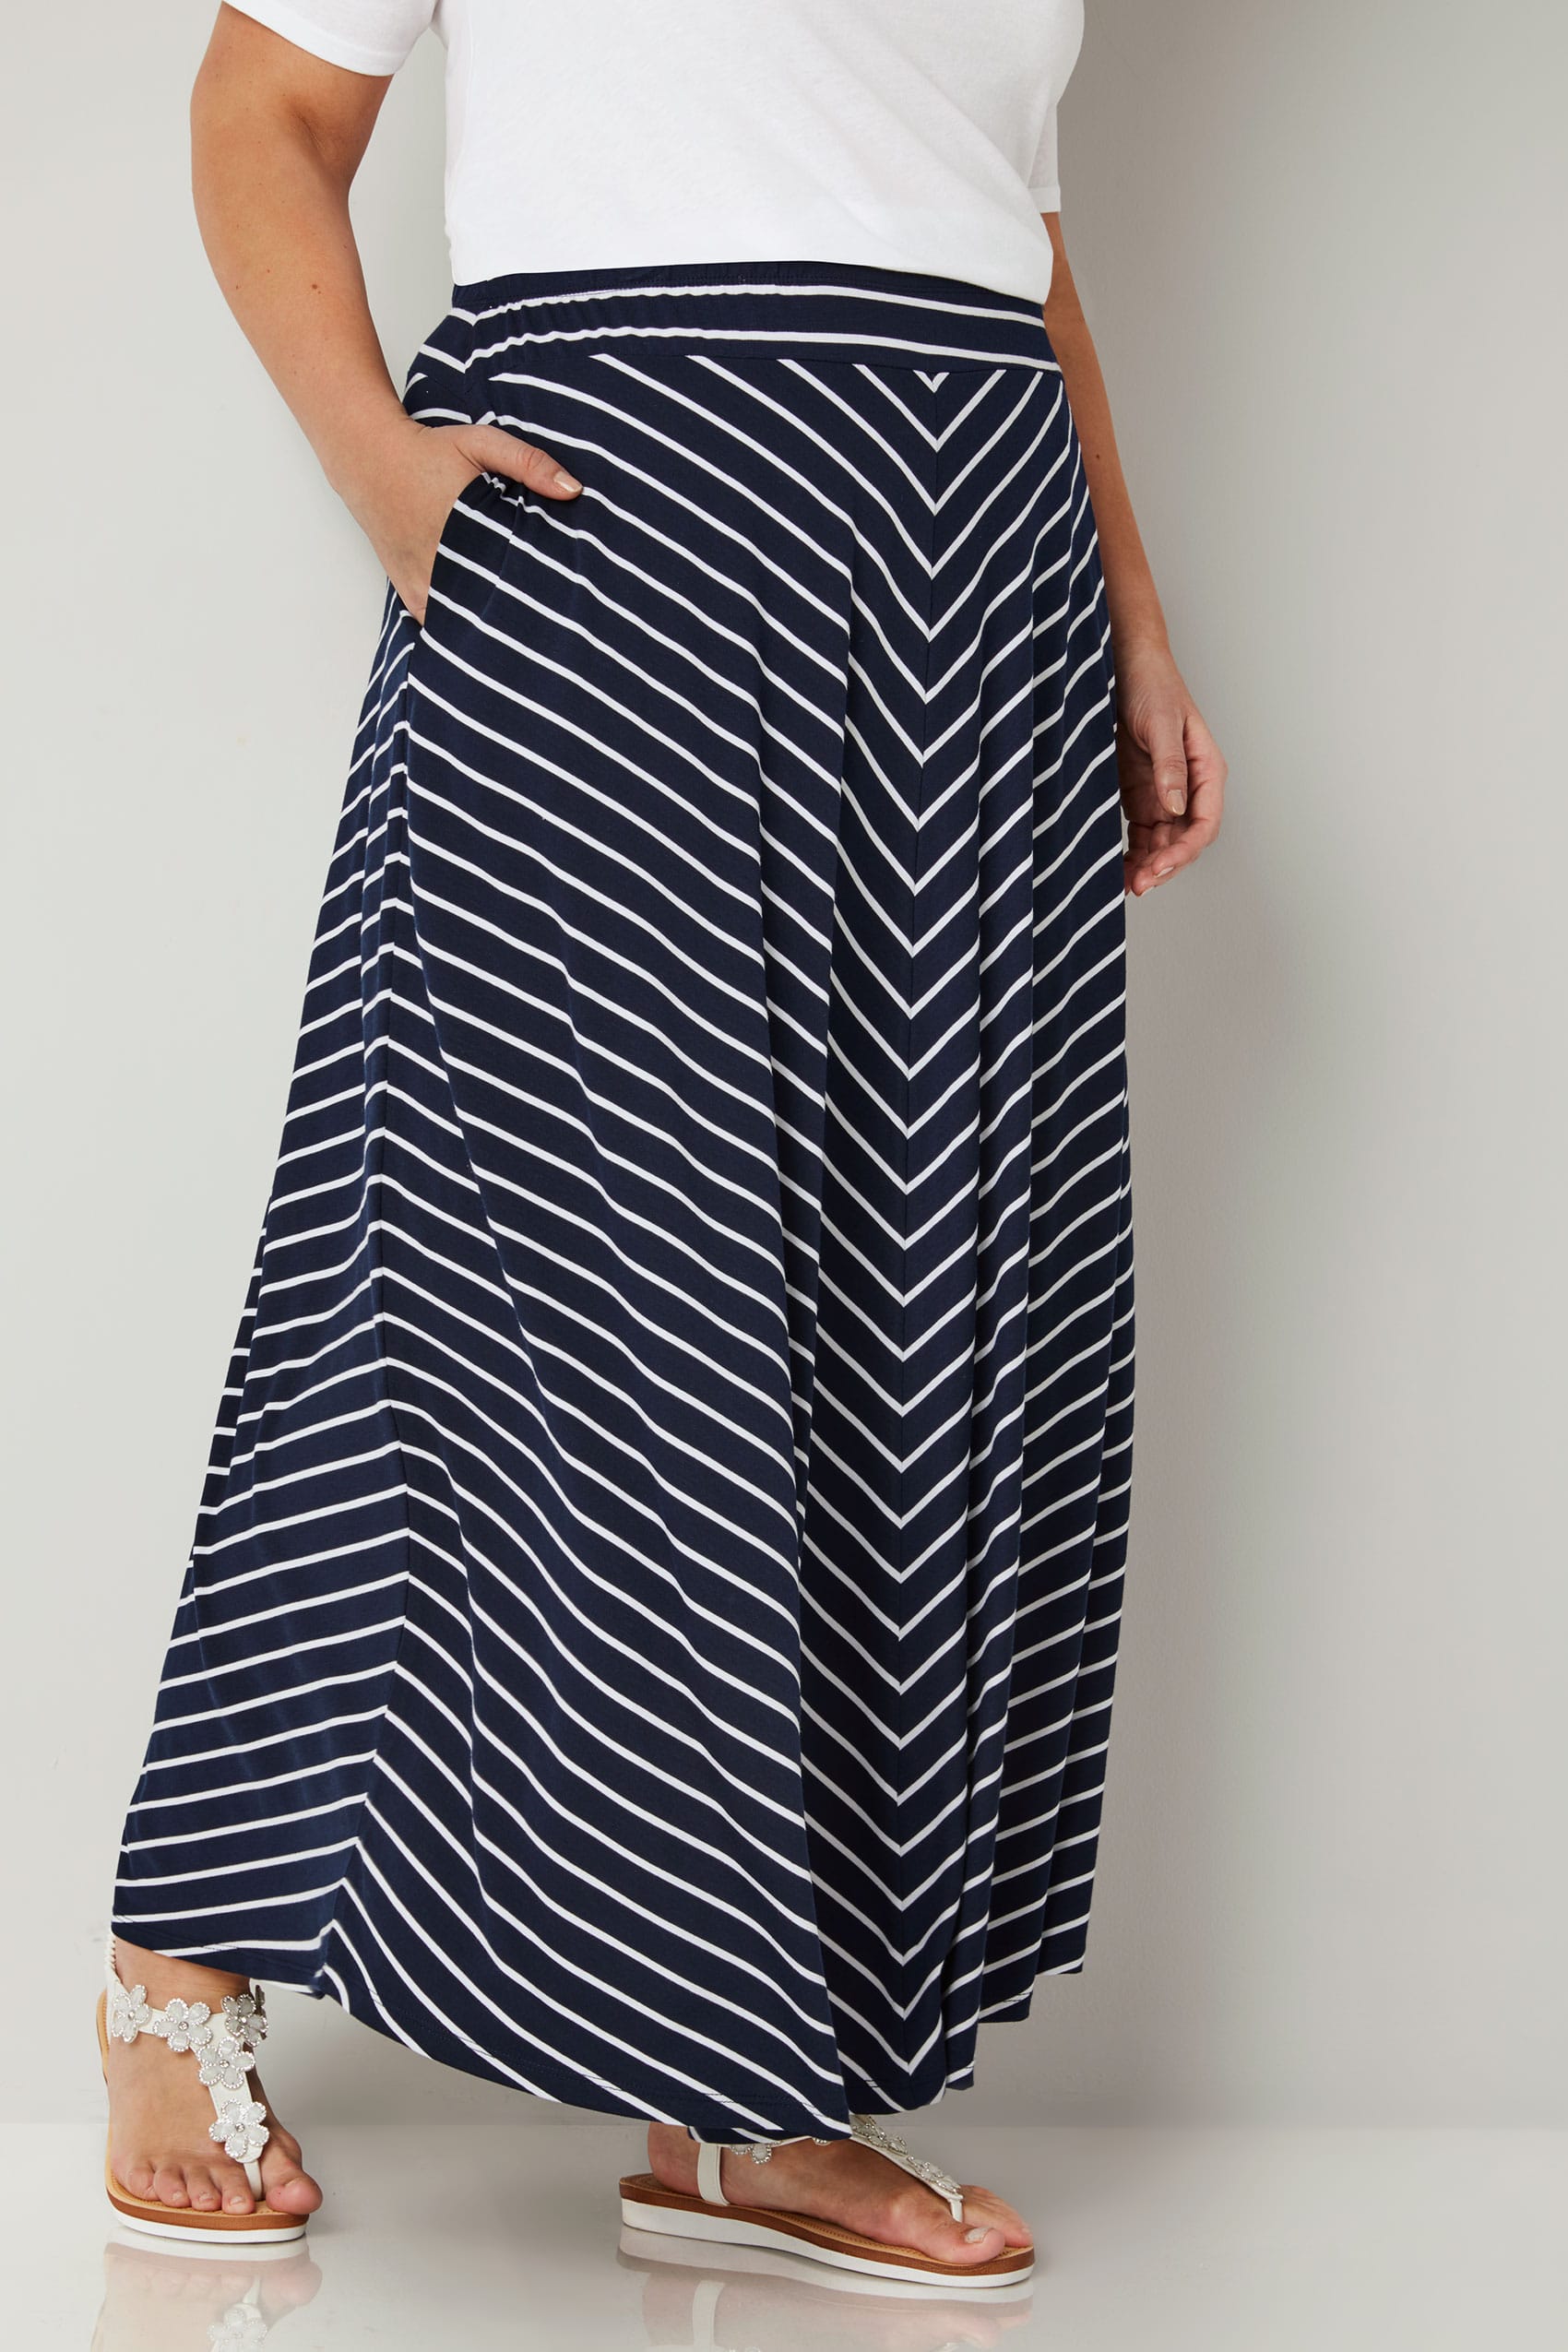 Navy & White Striped Maxi Skirt, Plus size 16 to 36 | Yours Clothing